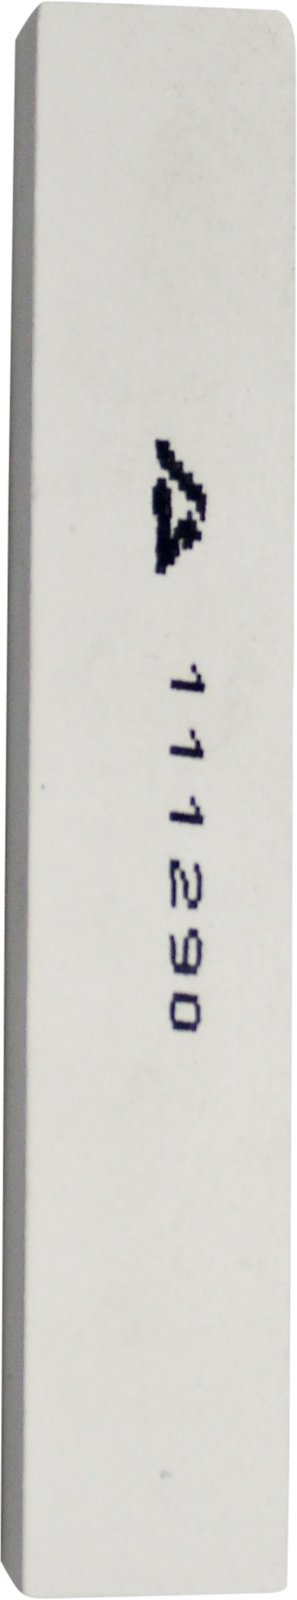 Dressing Stick for 5LC and 10LC, 3x0.5x0.5in